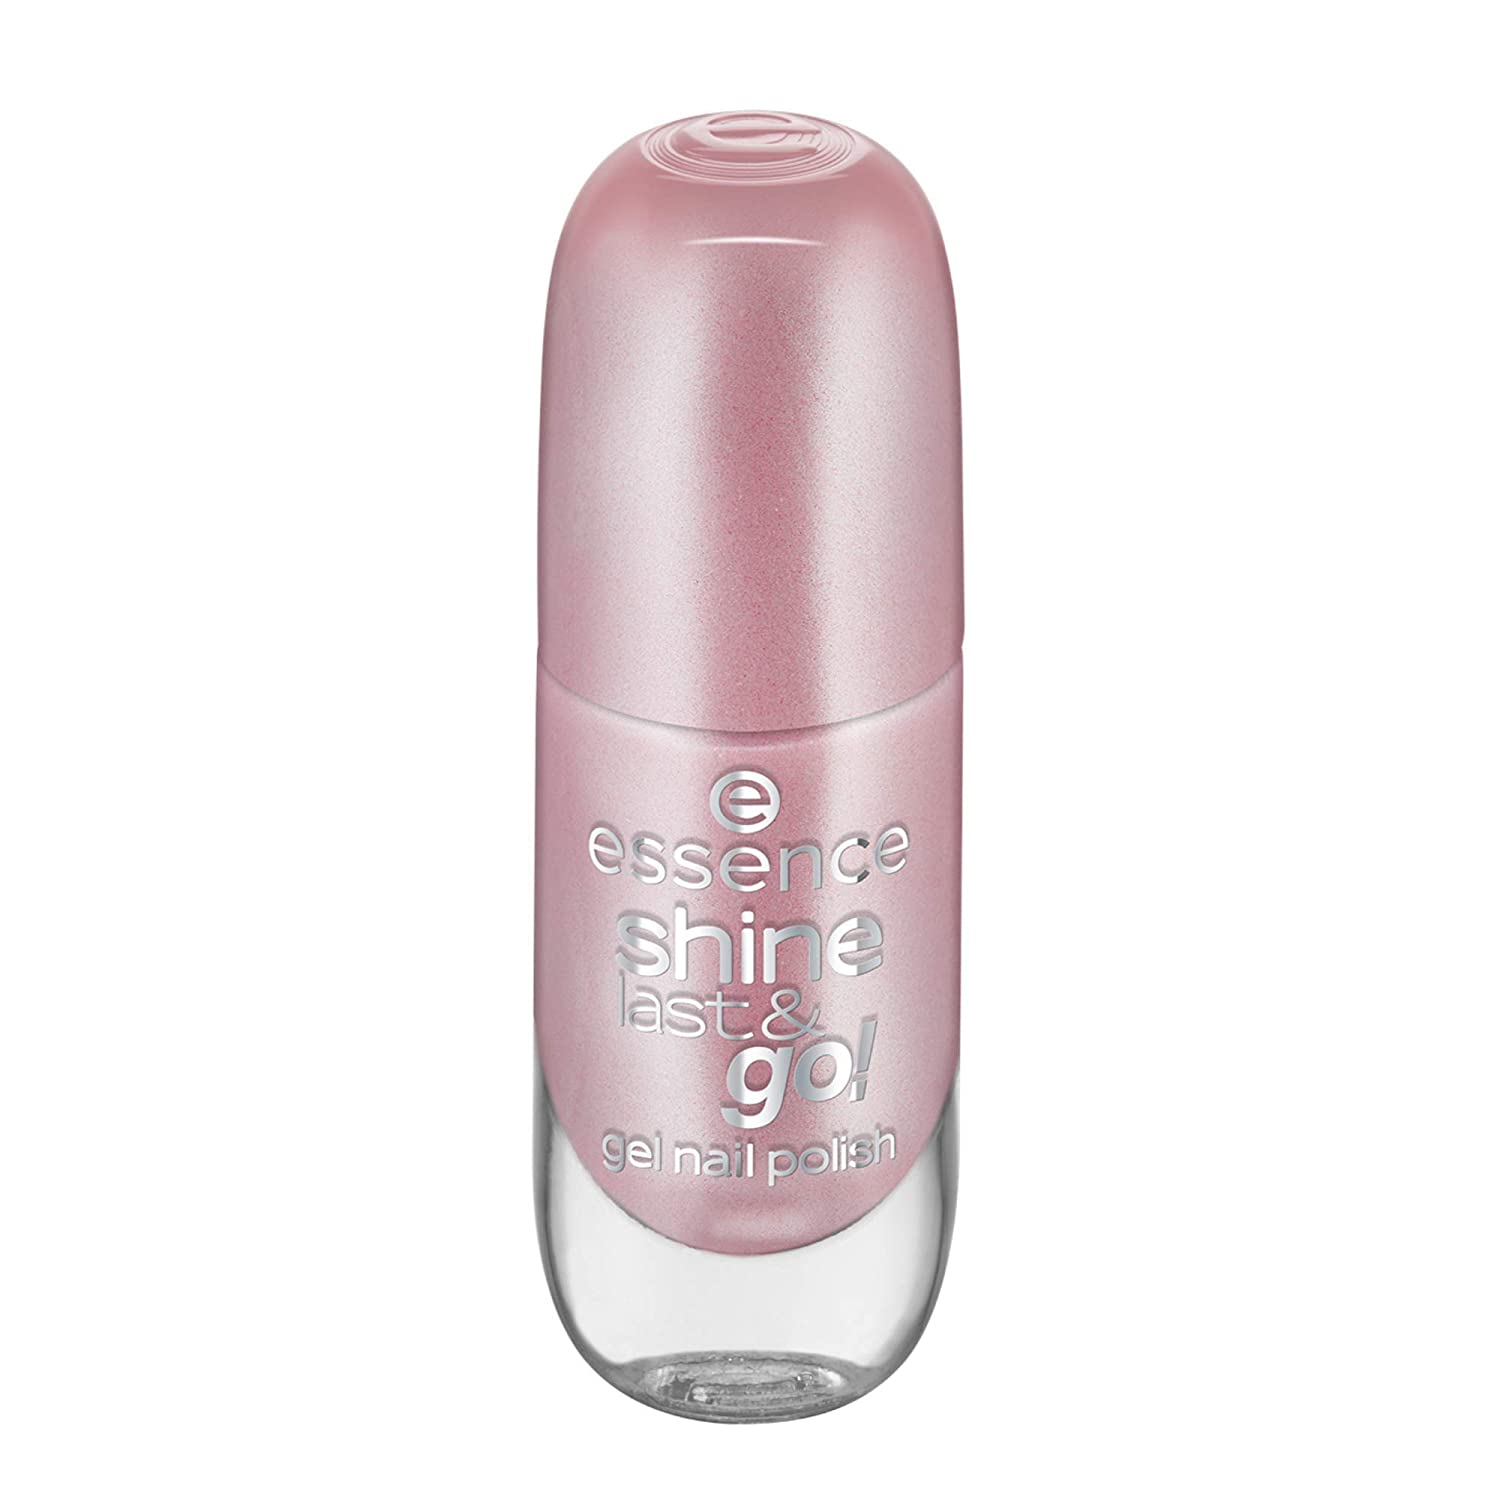 essence cosmetics essence shine last & go! Gel Nail Polish, Gel Polish, No. 06 Frosted Kiss, Pink, Gely, Shiny, No Acetone, Vegan, Microplastic Particles Free (8 ml), ‎06 kiss